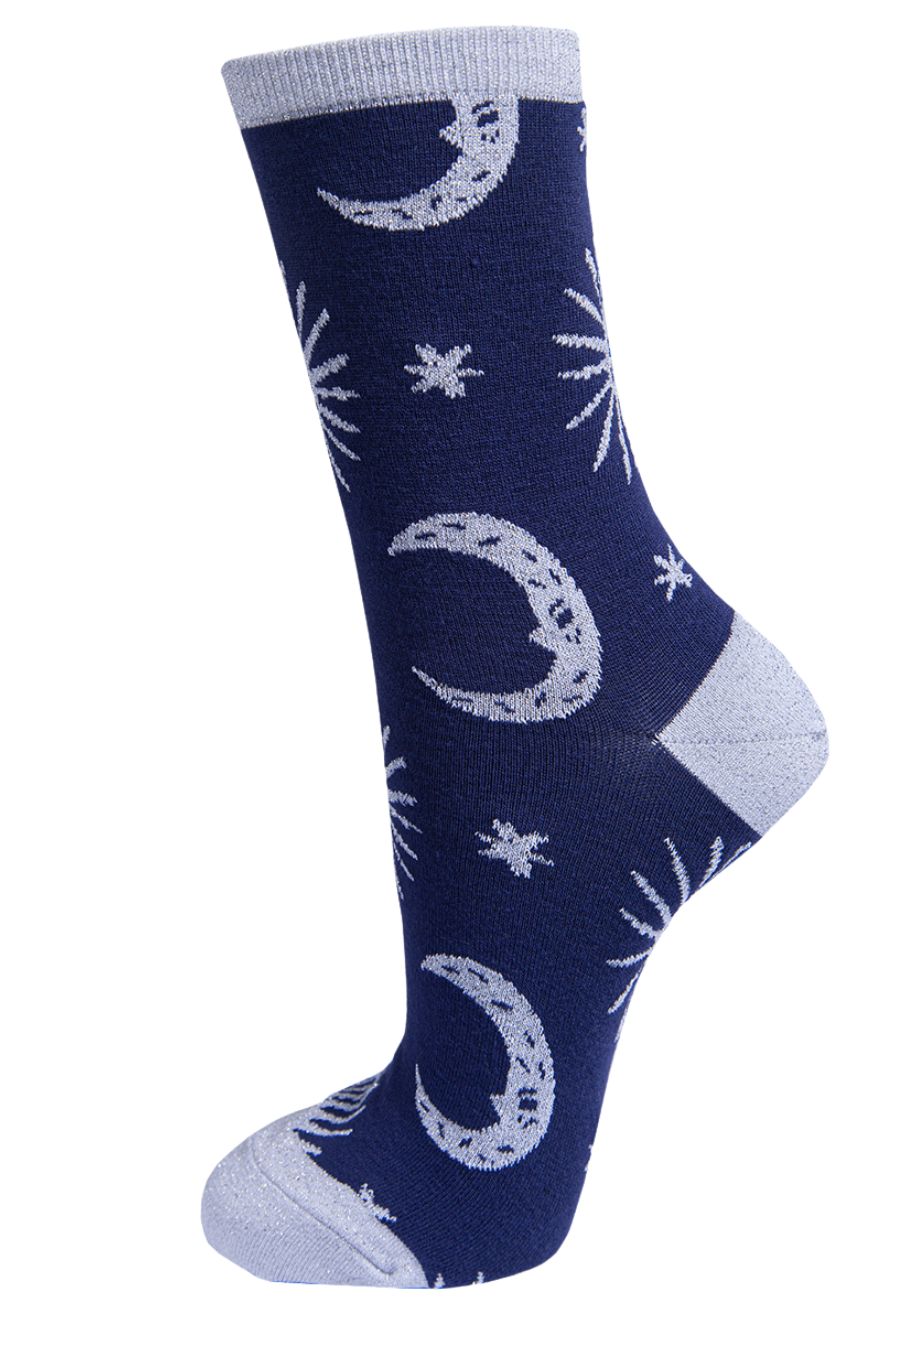 navy blue, silver glitter socks with moons and stars on them